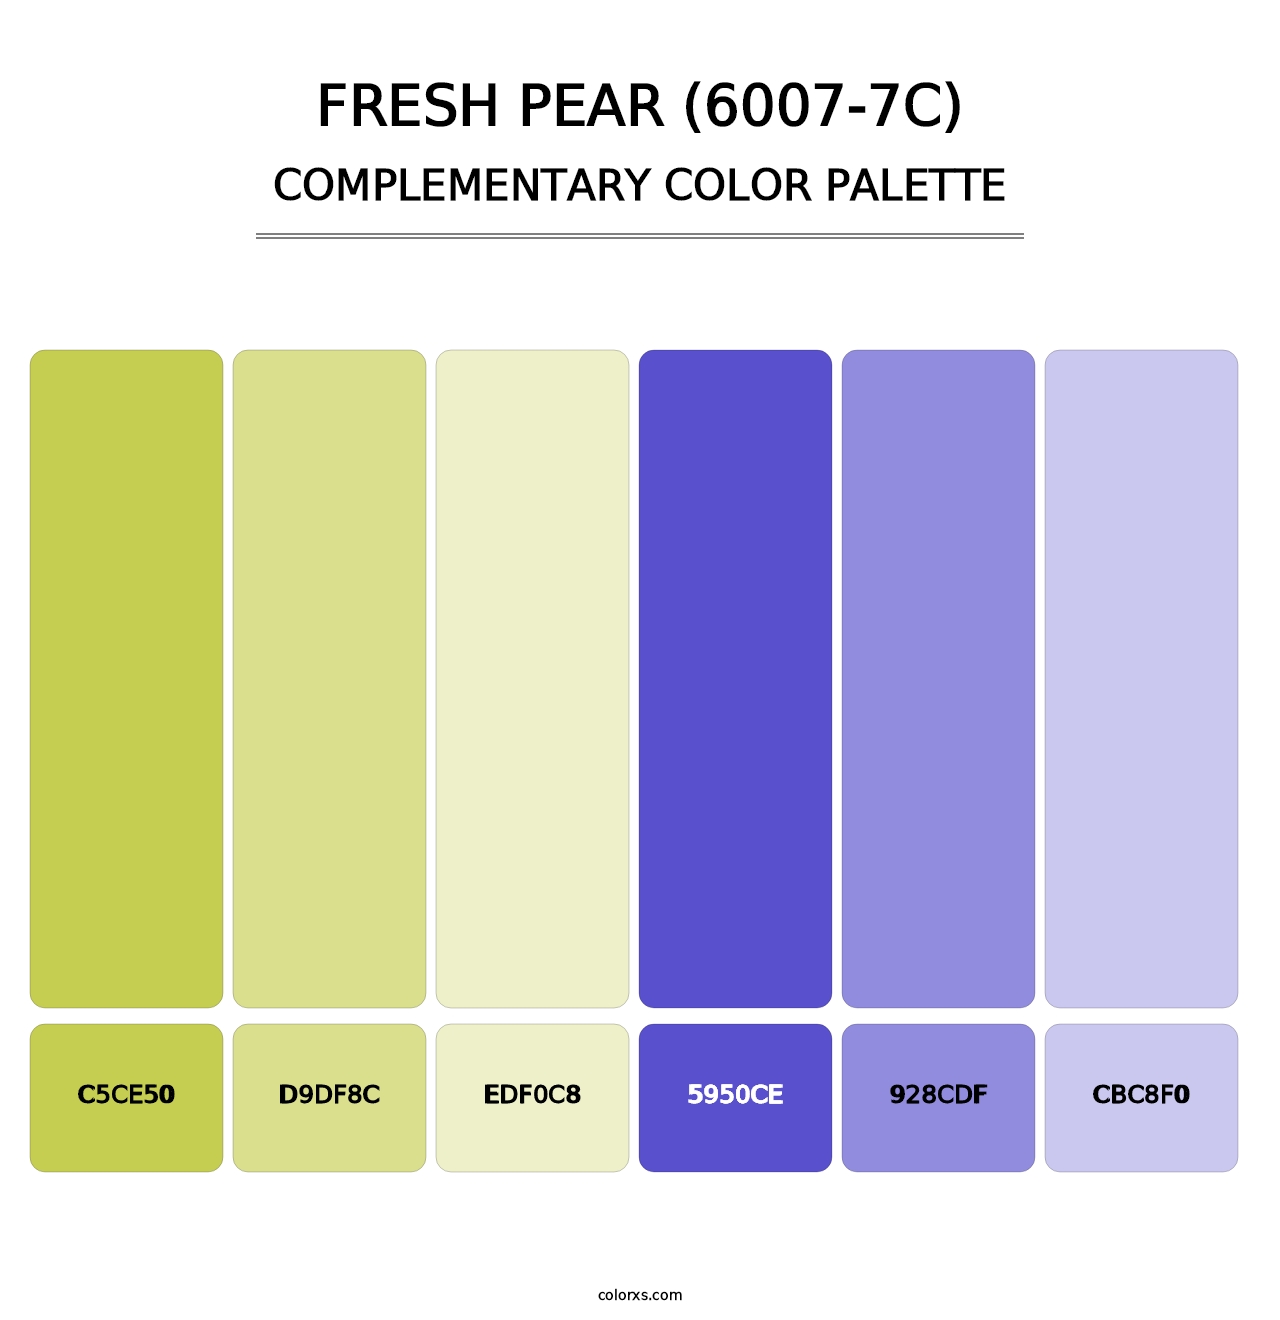 Fresh Pear (6007-7C) - Complementary Color Palette